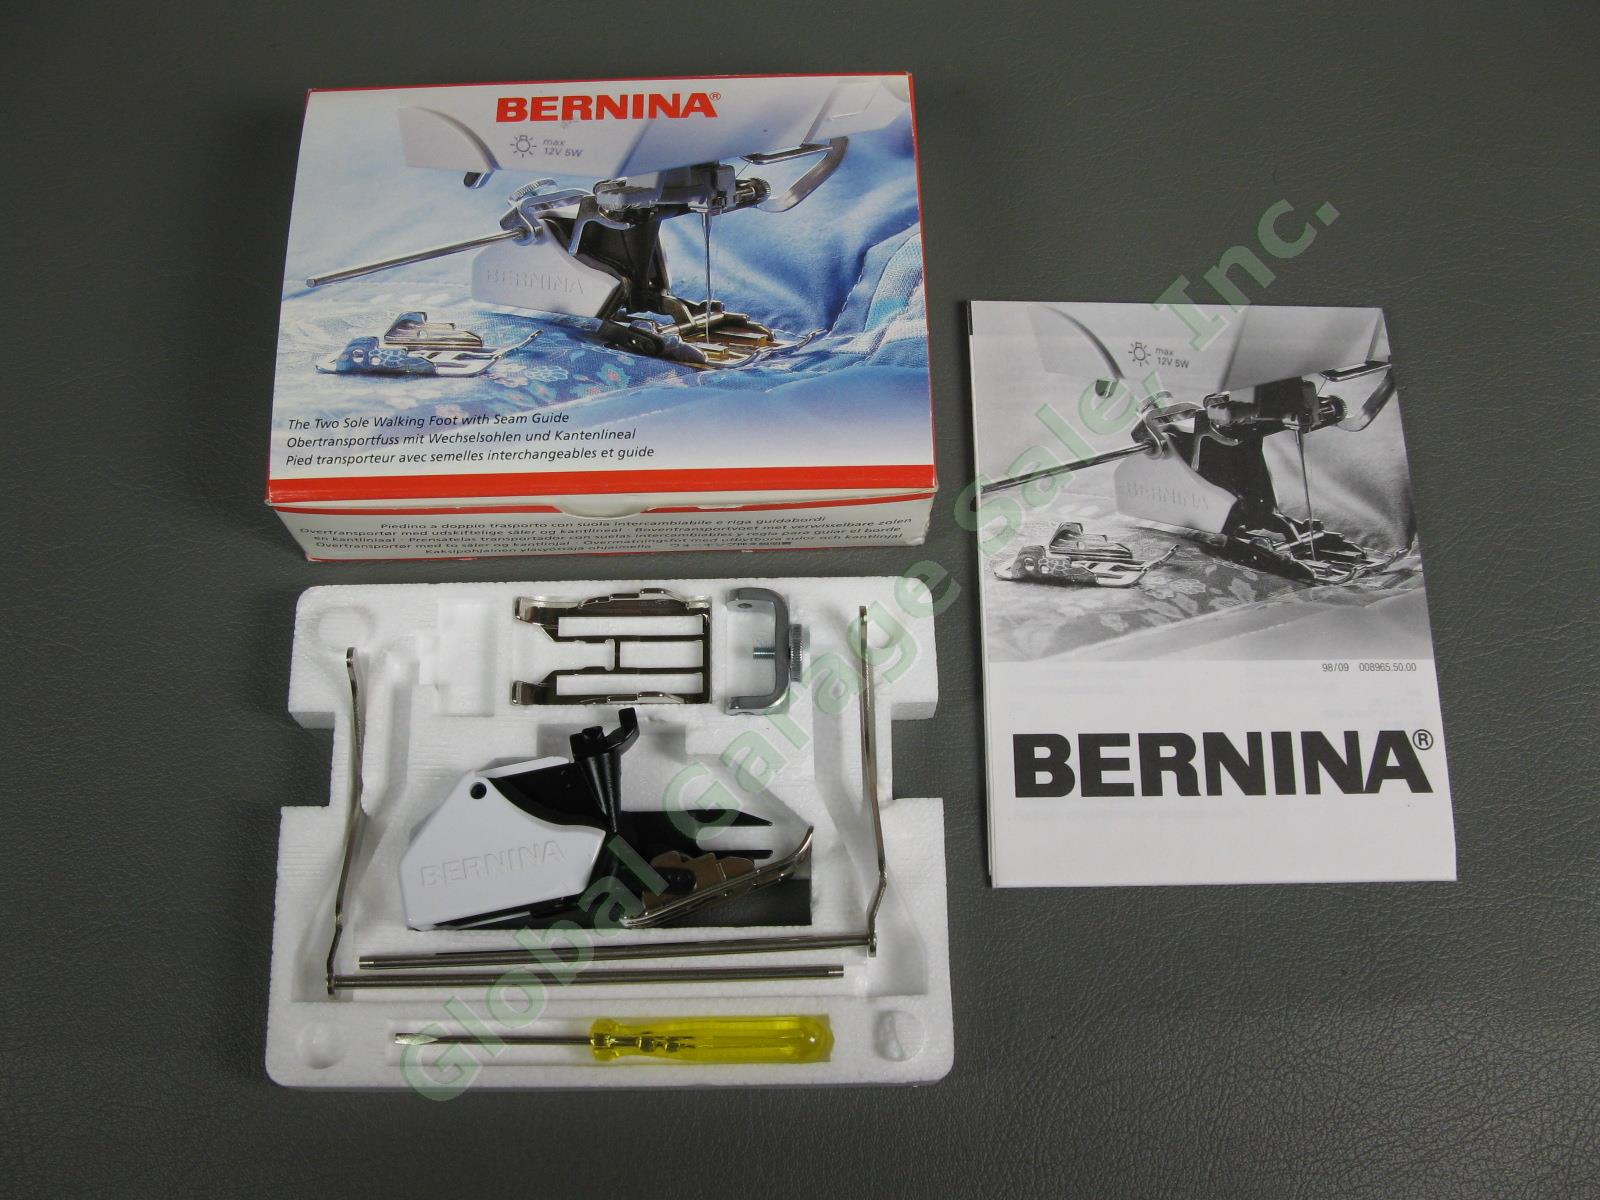 New Vintage Bernina The Two Sole Walking Foot Sewing Seam Guide 008-969-7000 NR